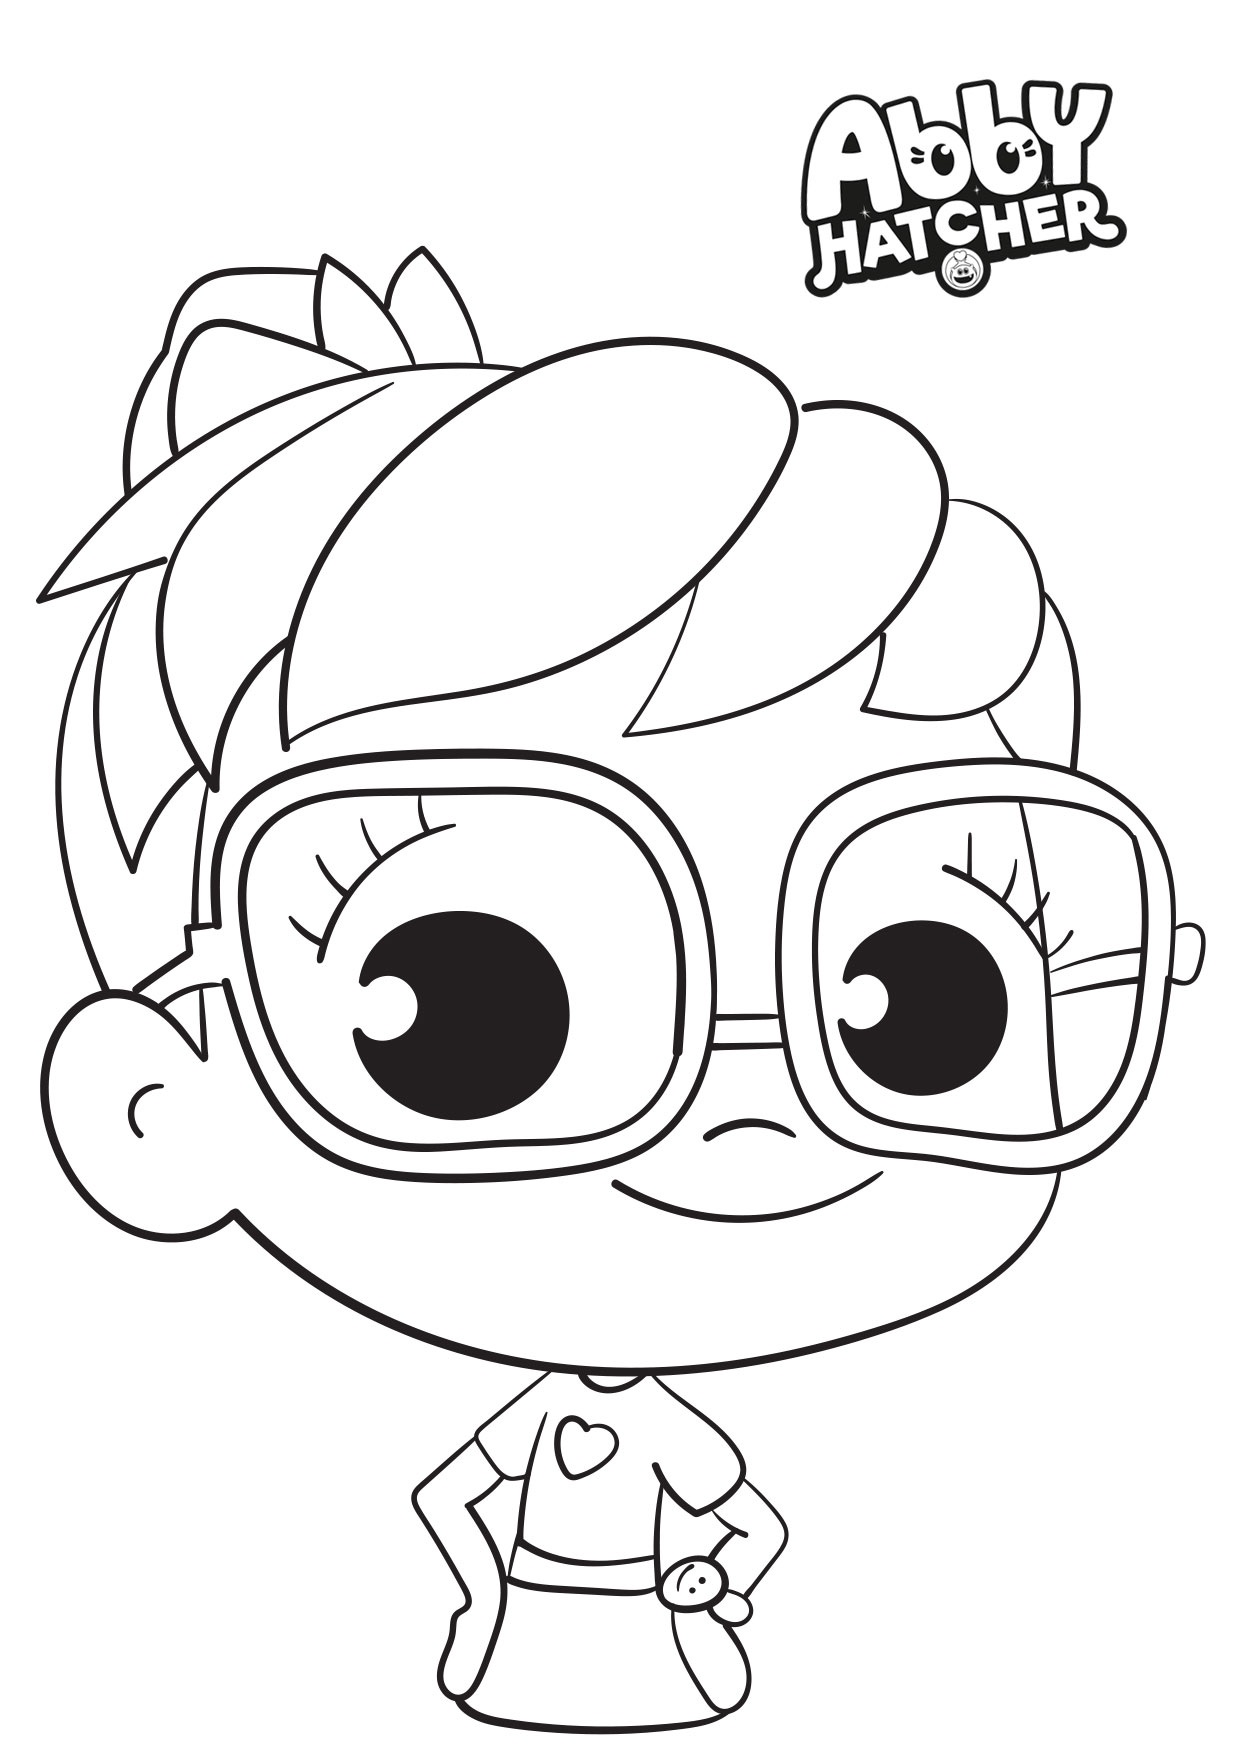 Abby Hatcher Harriet Coloring Pages Abby Hatcher Colo - vrogue.co